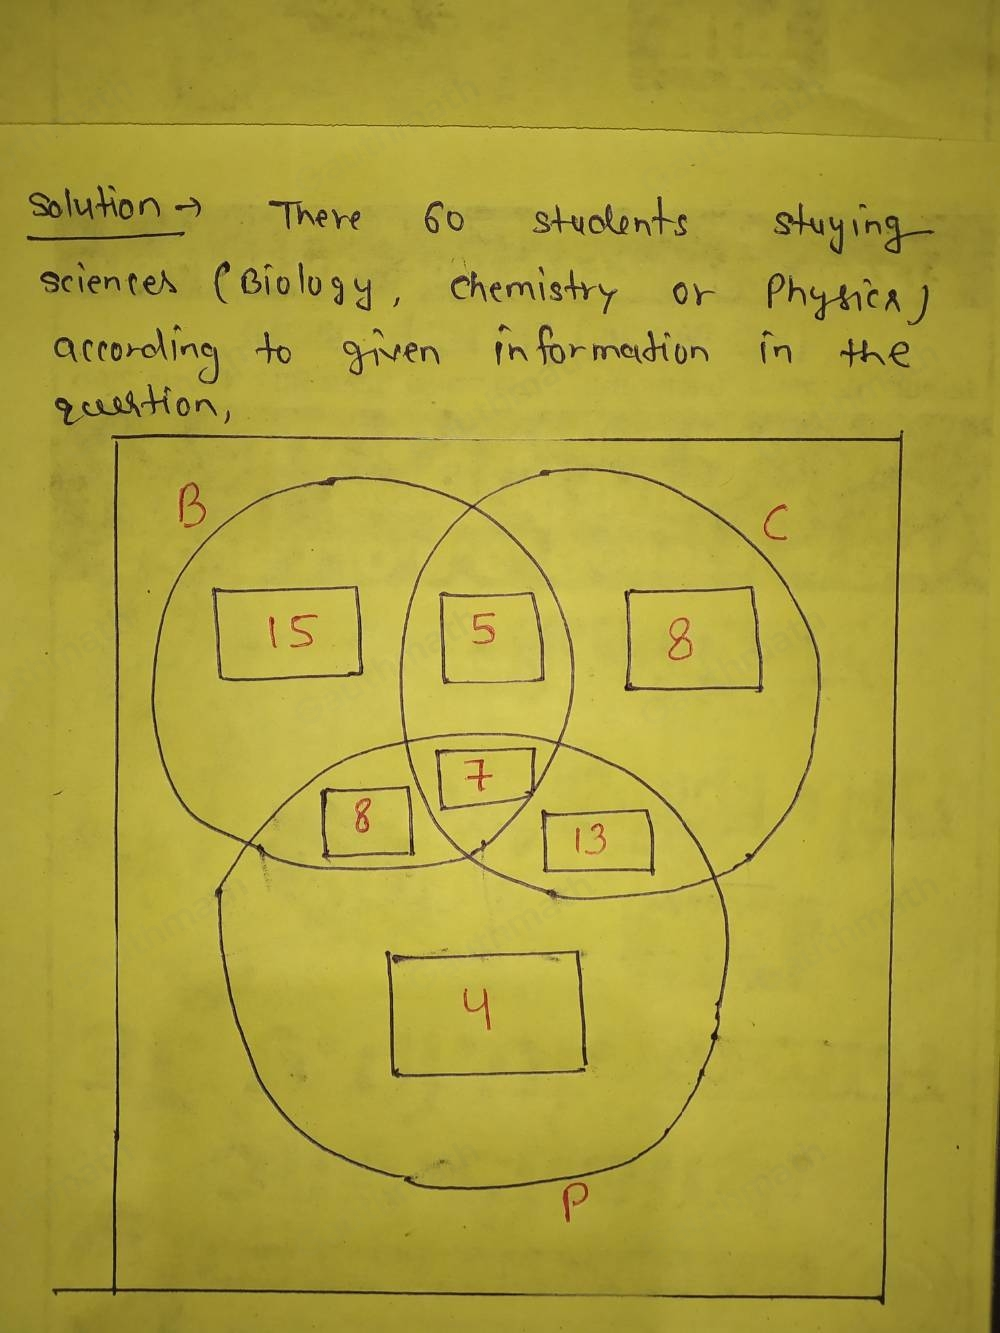 There are 60 students studying Sciences Biology, Chemistry or Physics 7 students study Biology, Chemistry and Physics. 12 students study Biology and Chemist 15 students study Biology and Physics. 20 students study Chemistry and Physi 35 students study Biology. 32 students study Physics. Complete the Venn diagram..